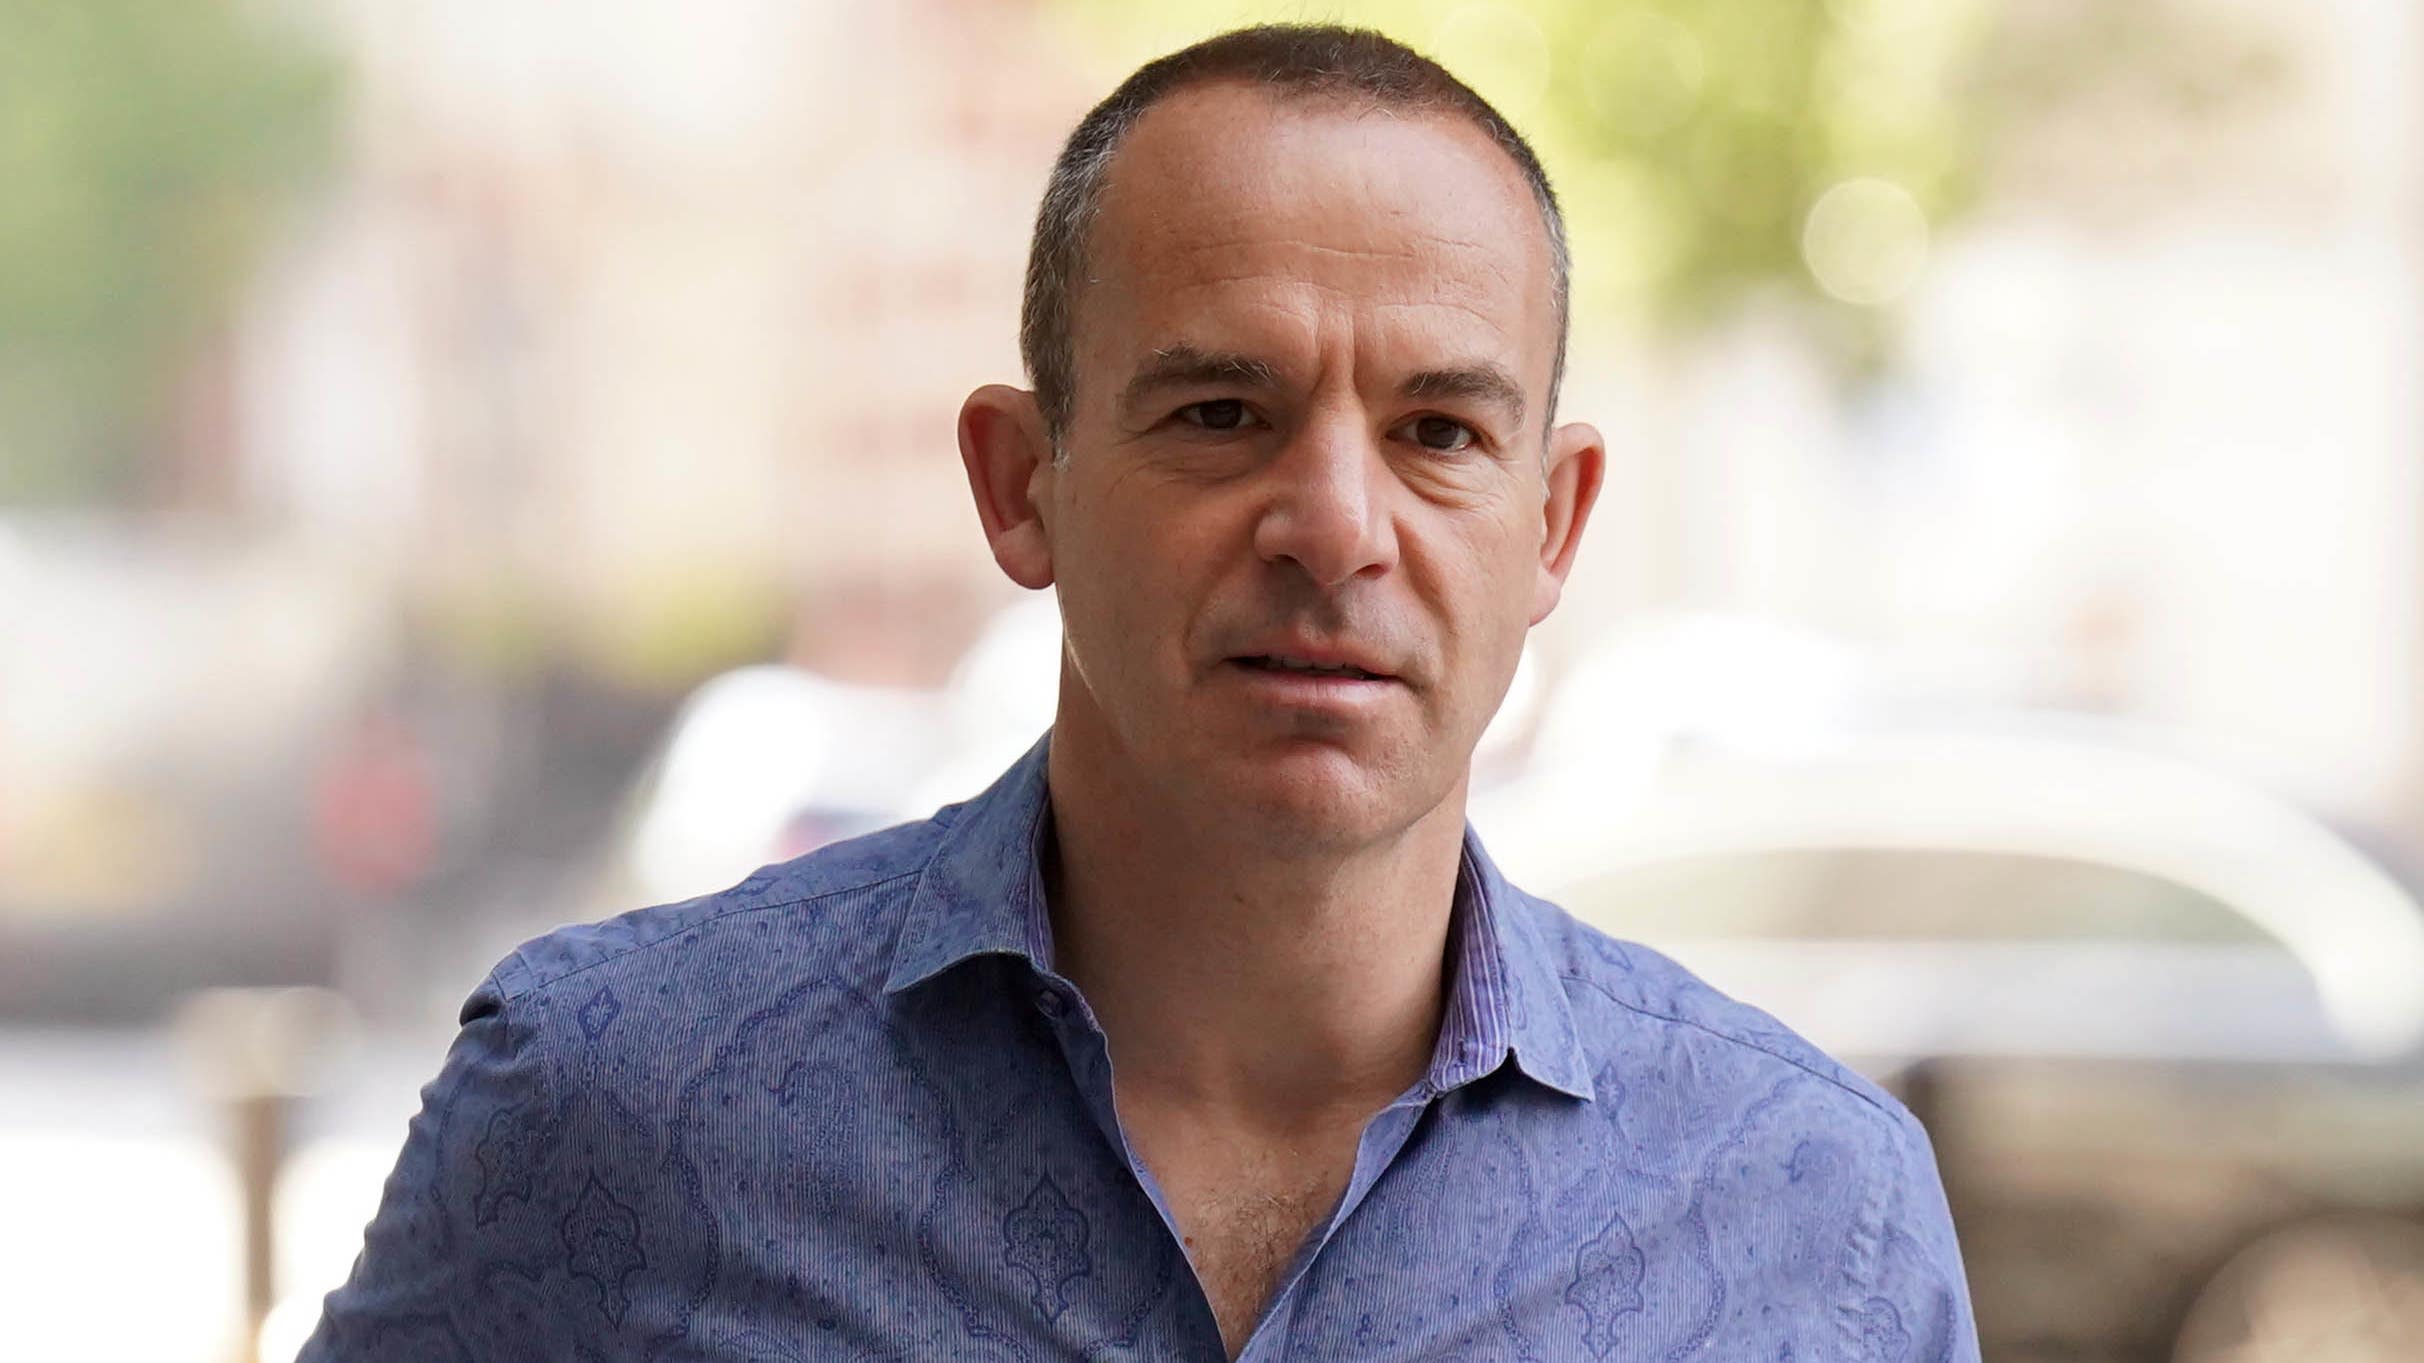 Martin Lewis issues warning over celebrity profiles commonly misused in scams